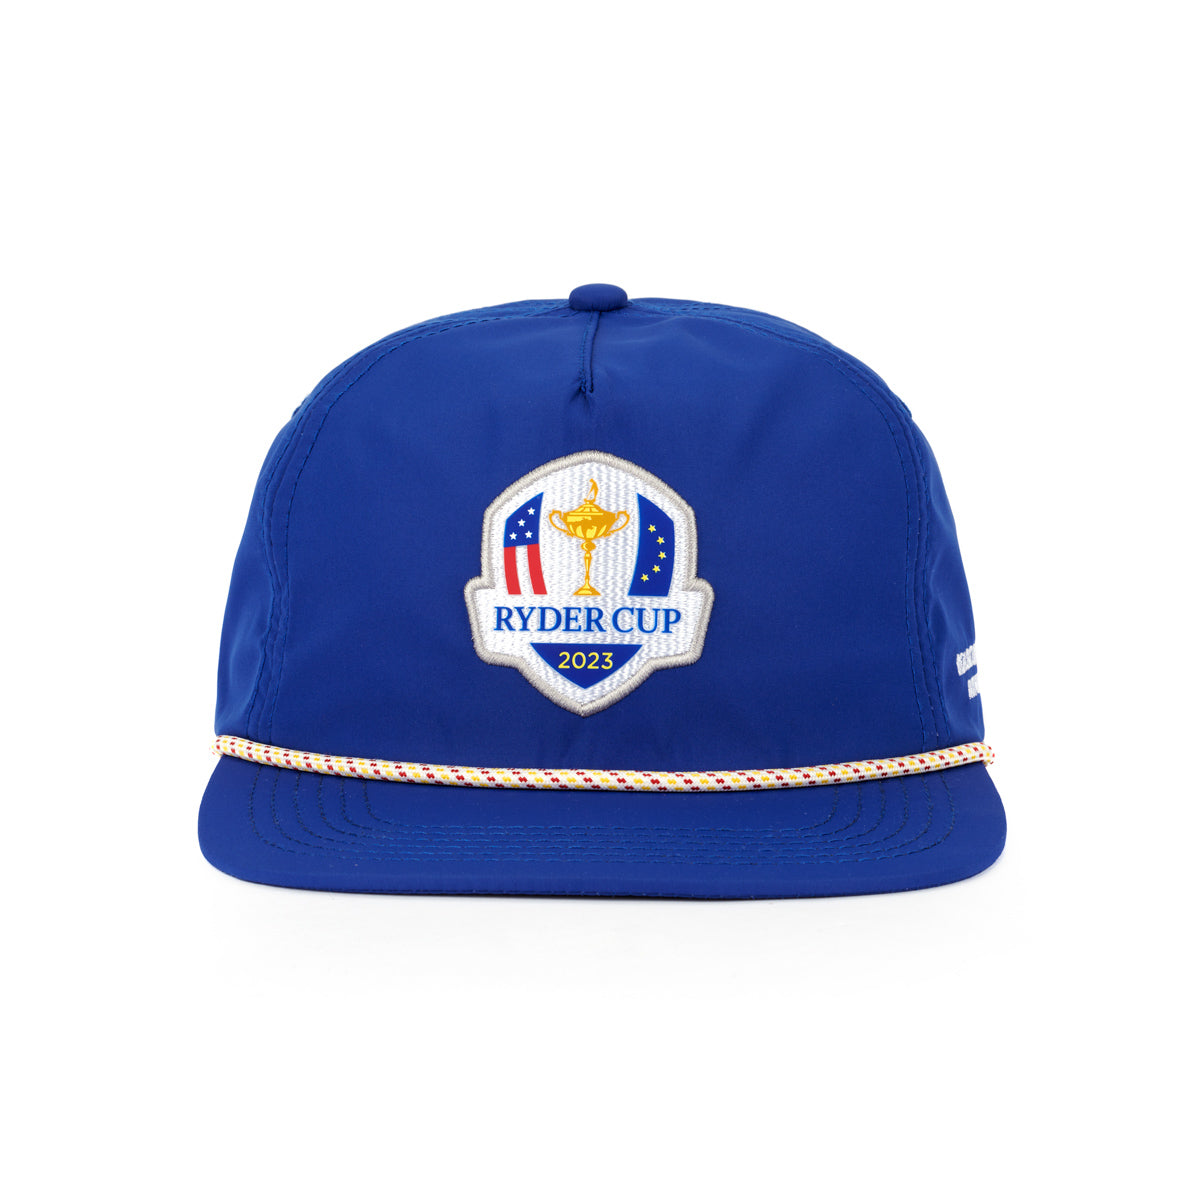 Barstool Golf x Ryder Cup Logo Rope Hat-Hats-Fore Play-Blue-One Size-Barstool Sports